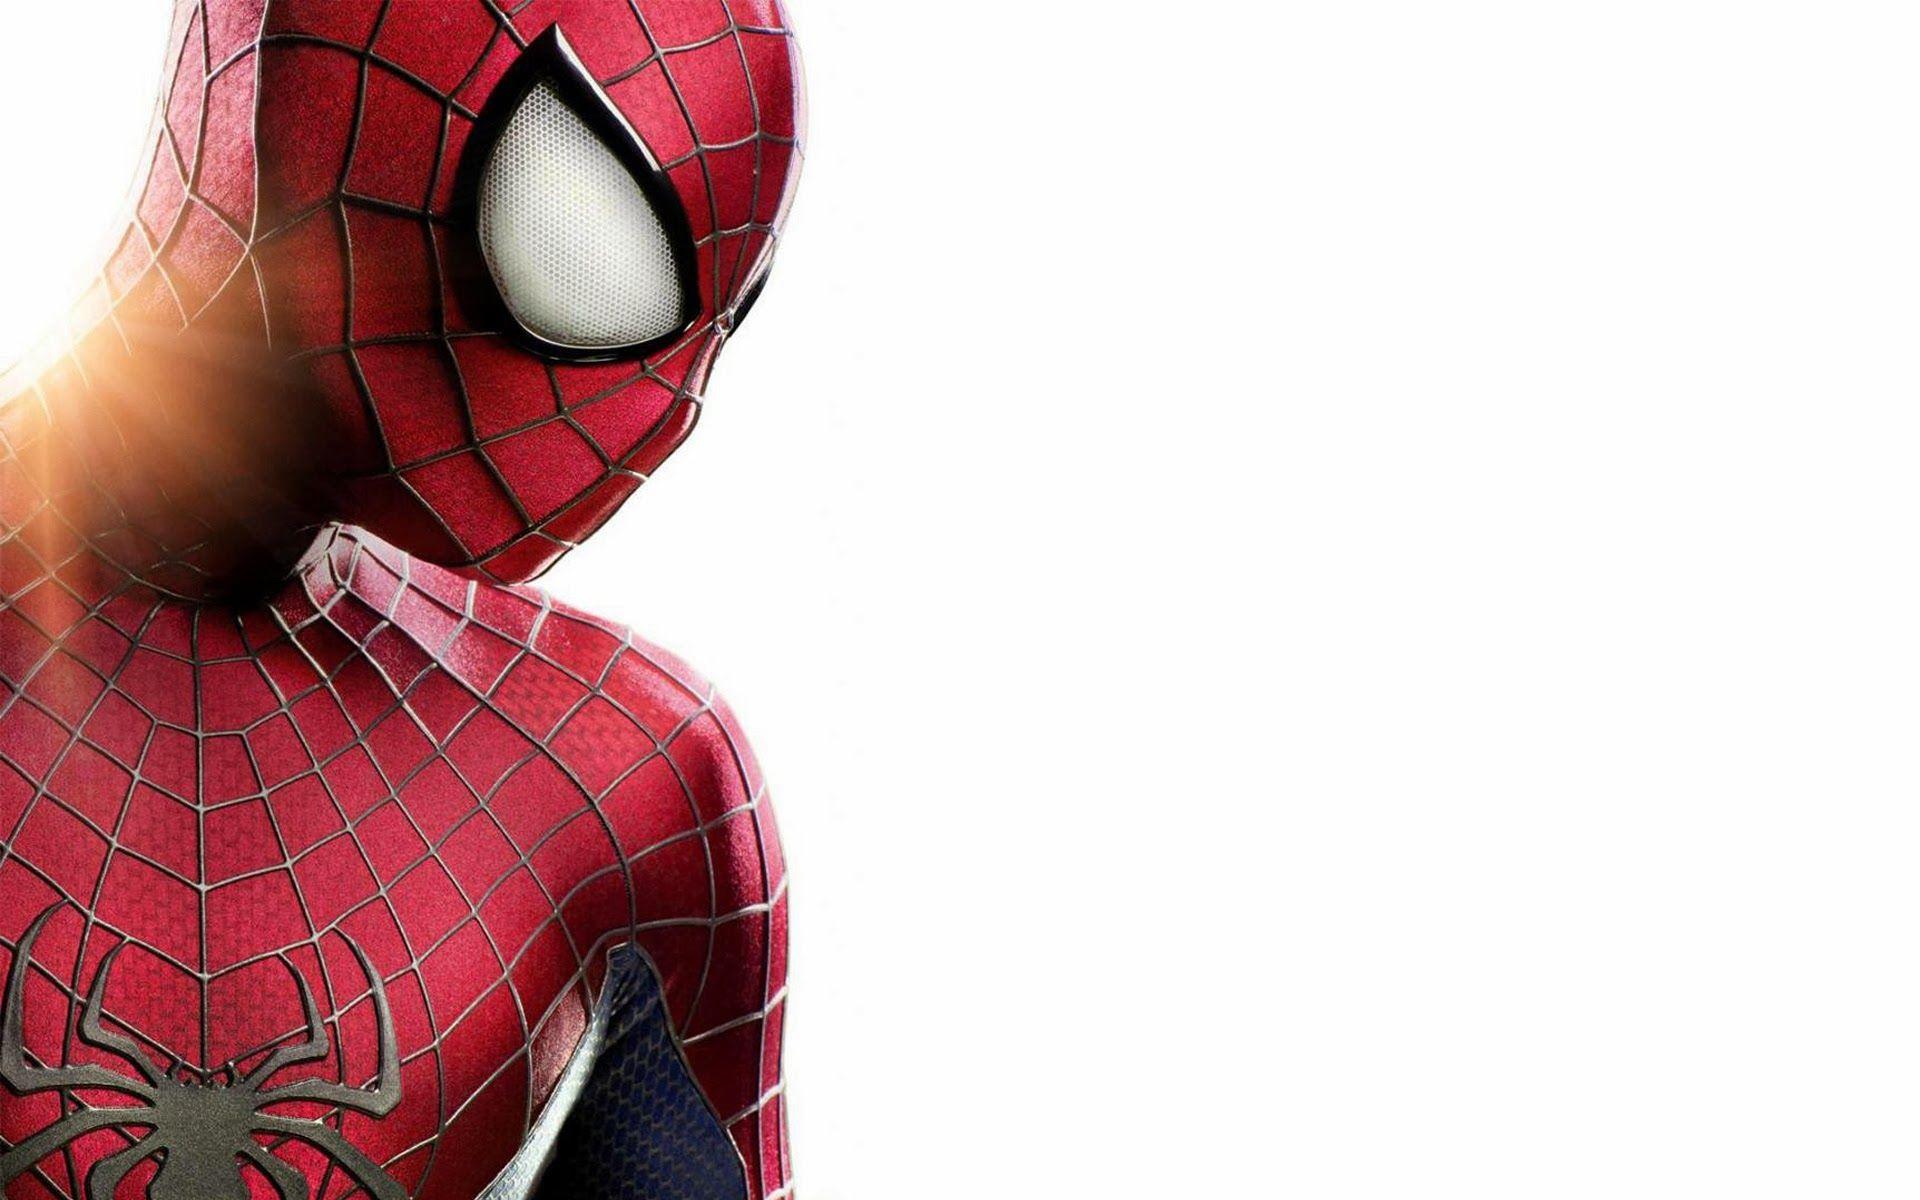 Spider Man Image, High Definition, High Quality, Widescreen